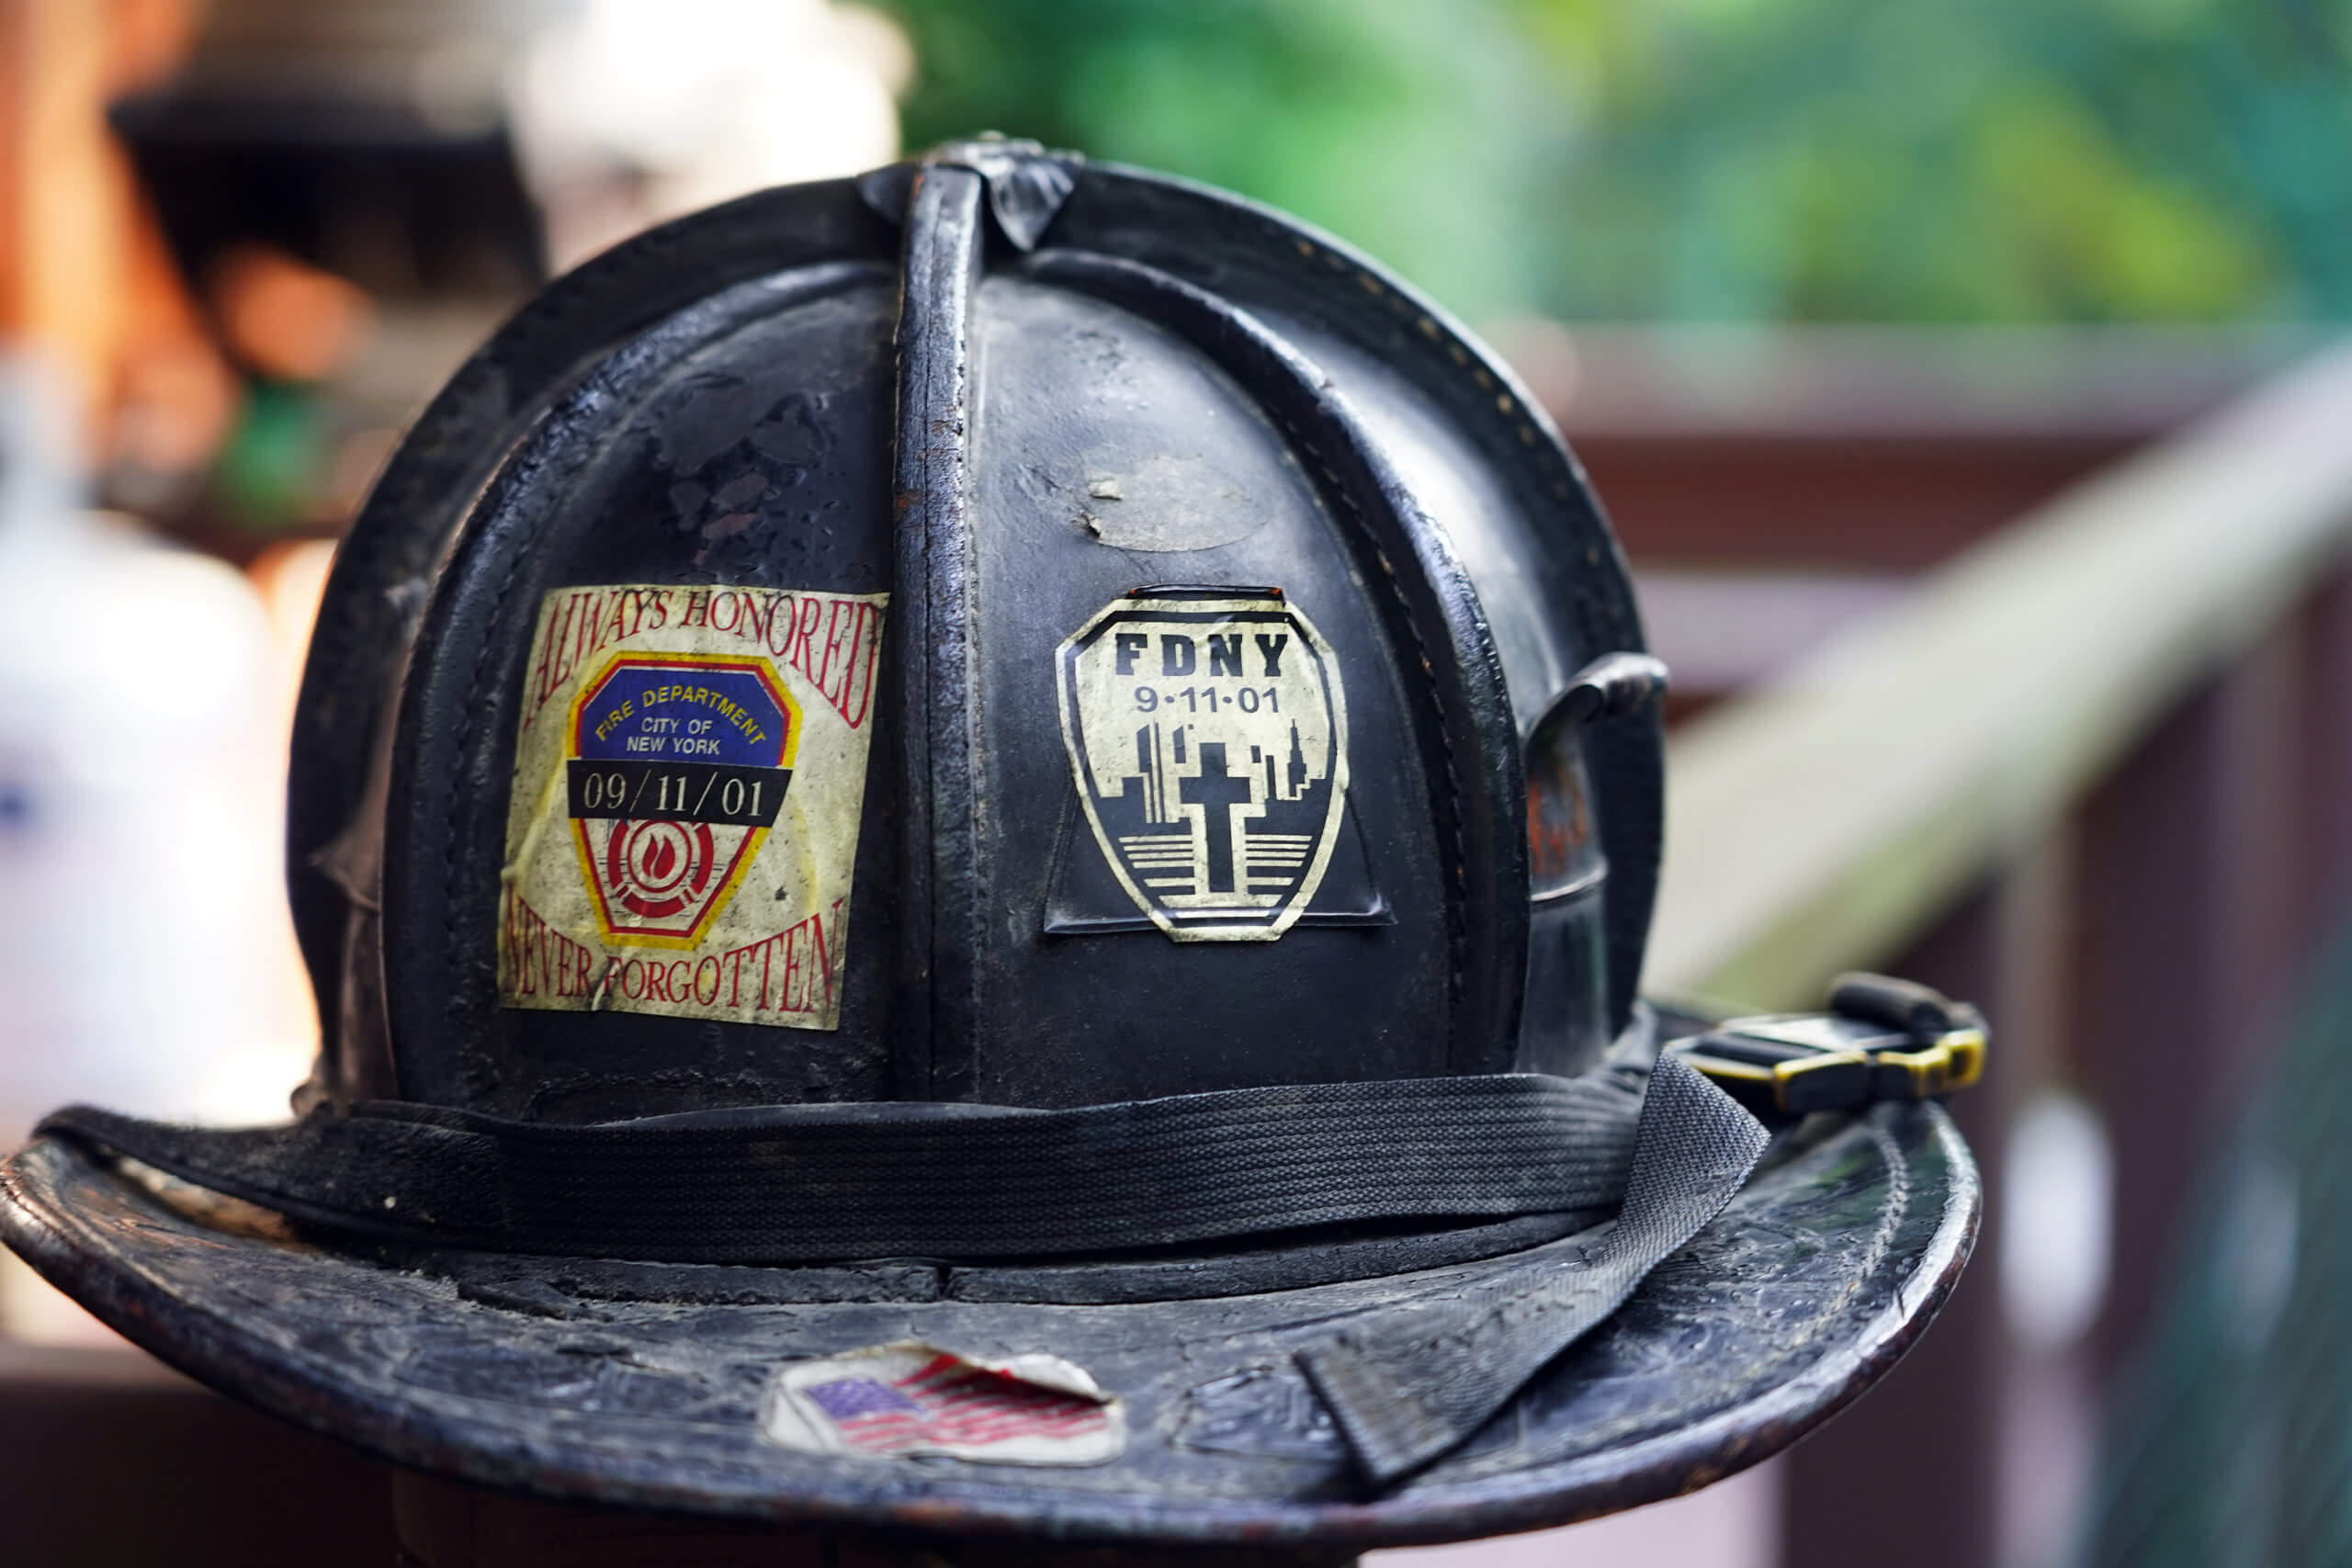 FDNY Lt. Raymond Brown’s helmet, August 29, 2021 in Sag Harbor, N.Y. Approaching the 20th anniversary of Sept. 11 he recalls how he survived the terrorist attack at the World Trade Center. ‘This helmet saved my life. Debris hit the back of my head knocking me out. It was almost 344.’ Referring to the 343 firefighters killed that day.